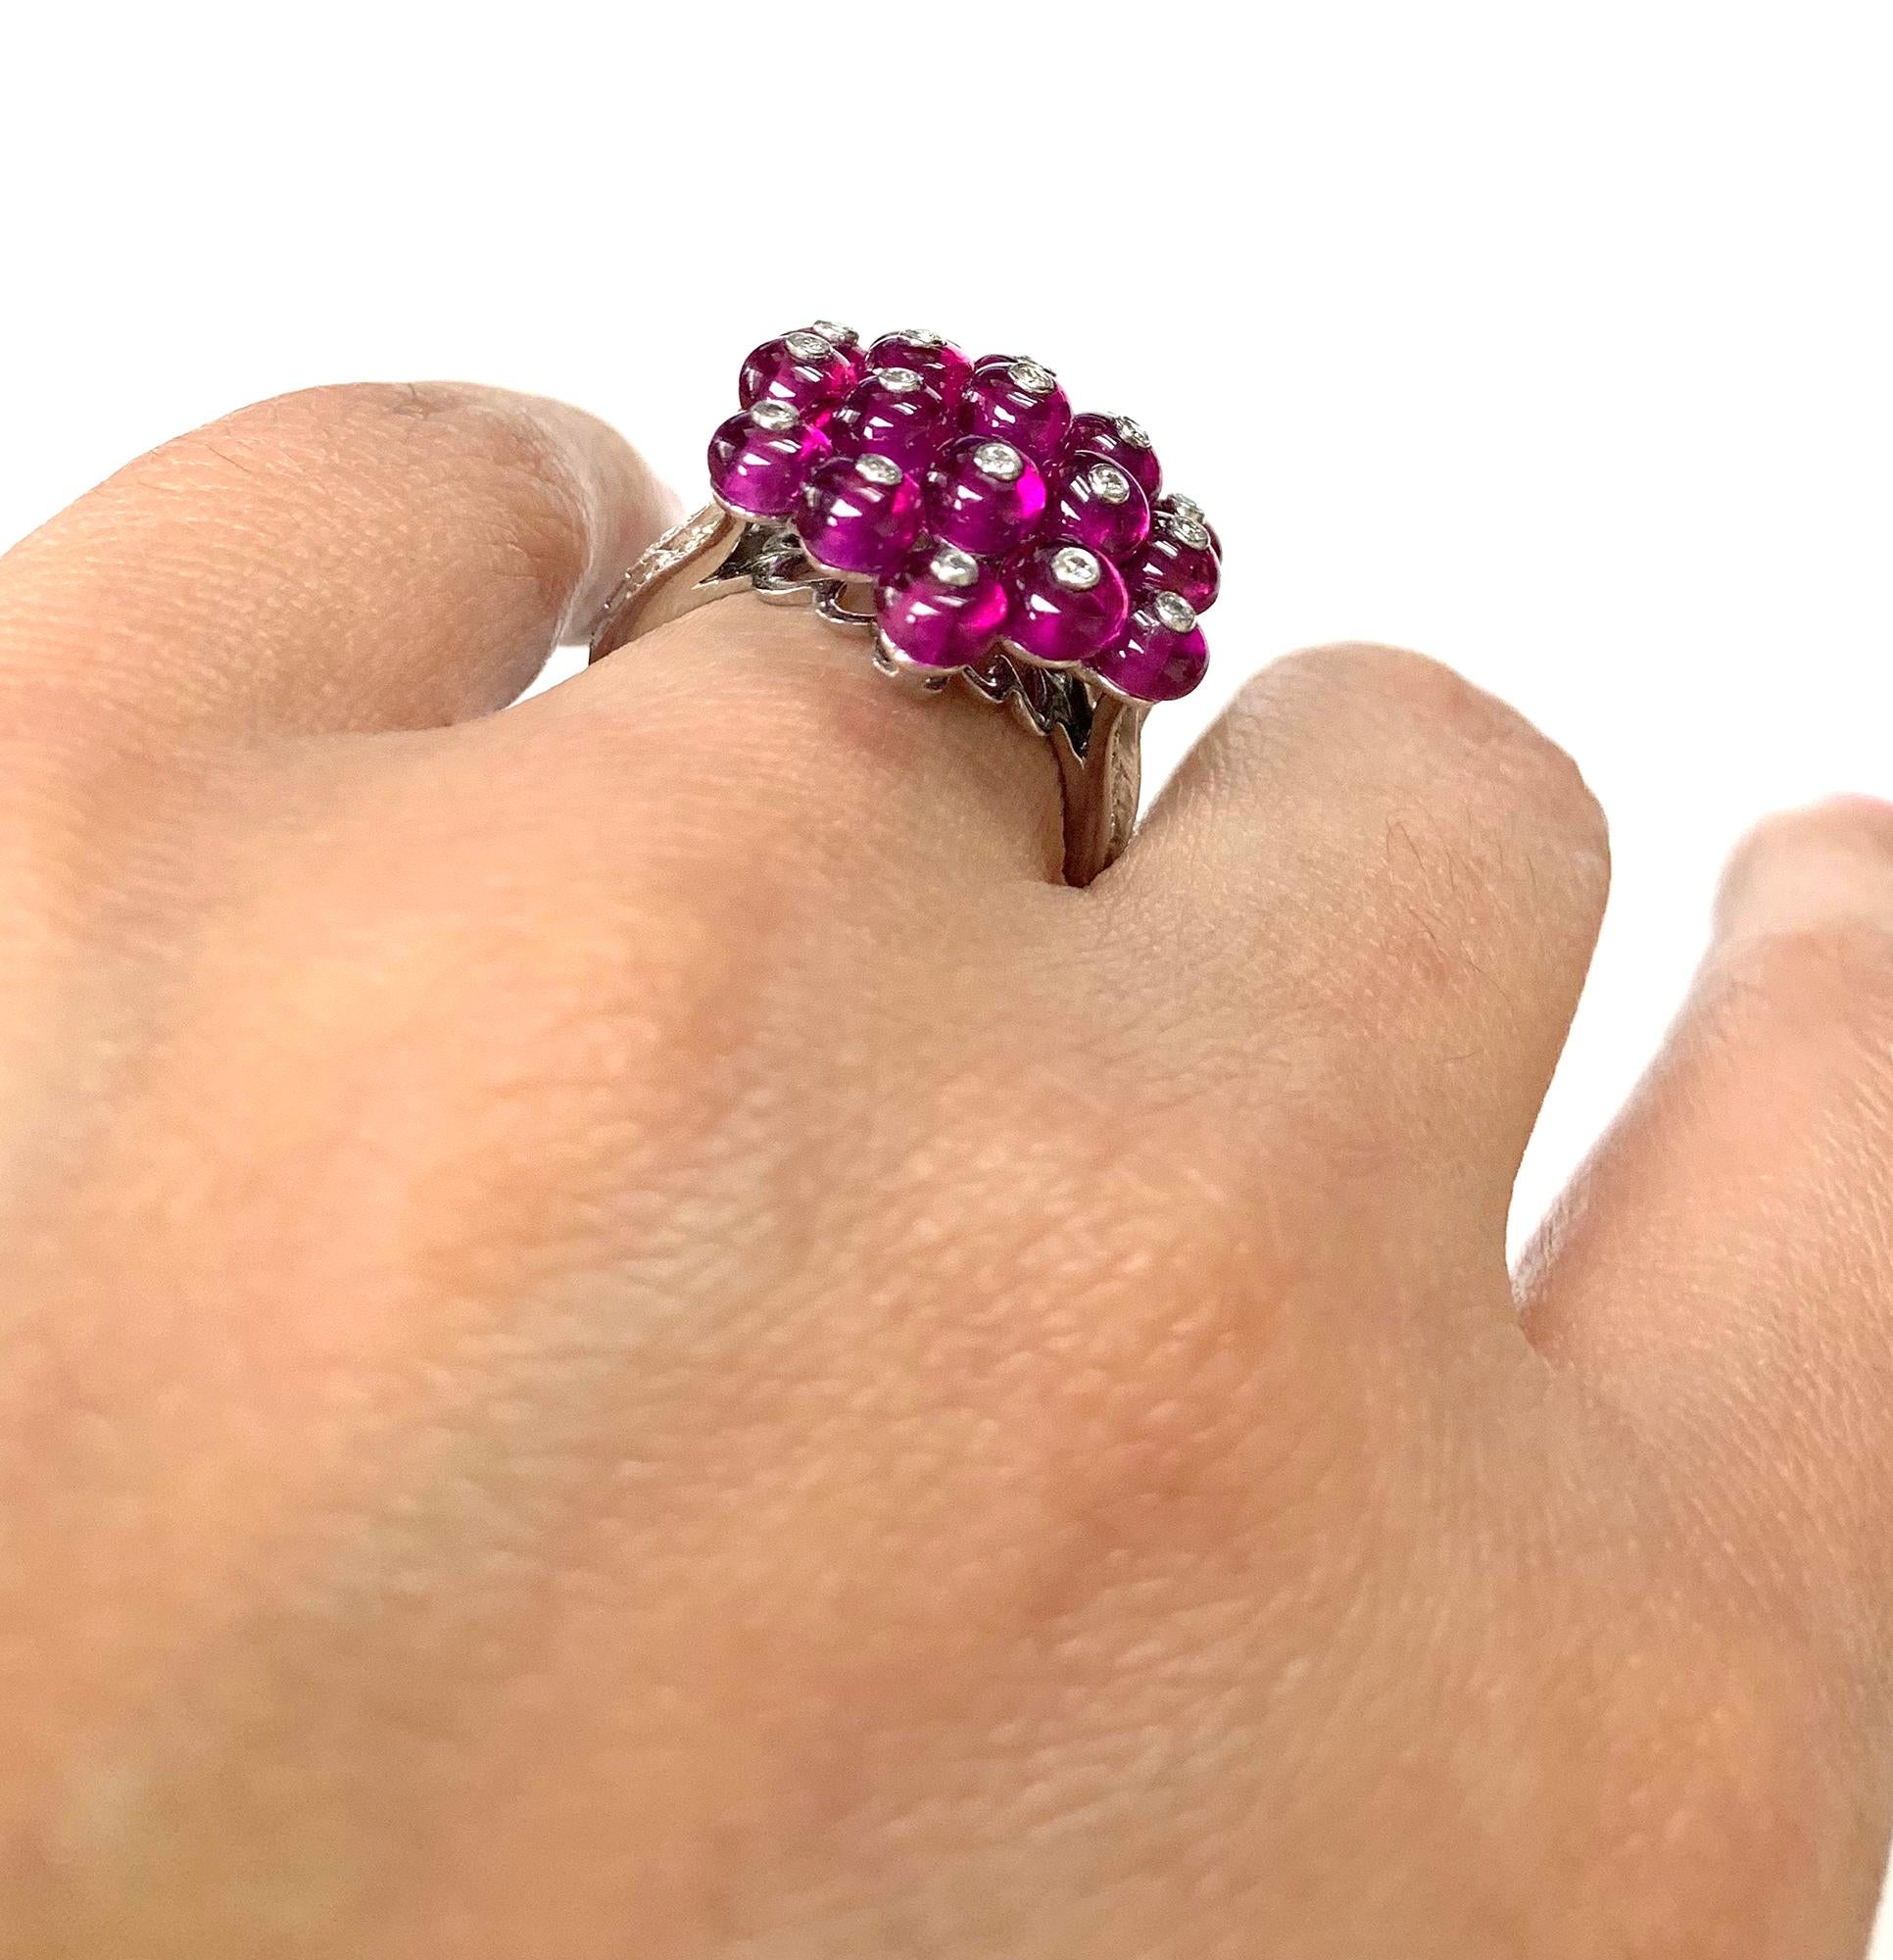 Cluster Ruby Bead Ring in Platinum, from 'G-One' Collection

Approx. Wt: 11.42 Carats (Ruby)

Diamonds: G-H / VS, Approx Wt: 0.70 Carats 
